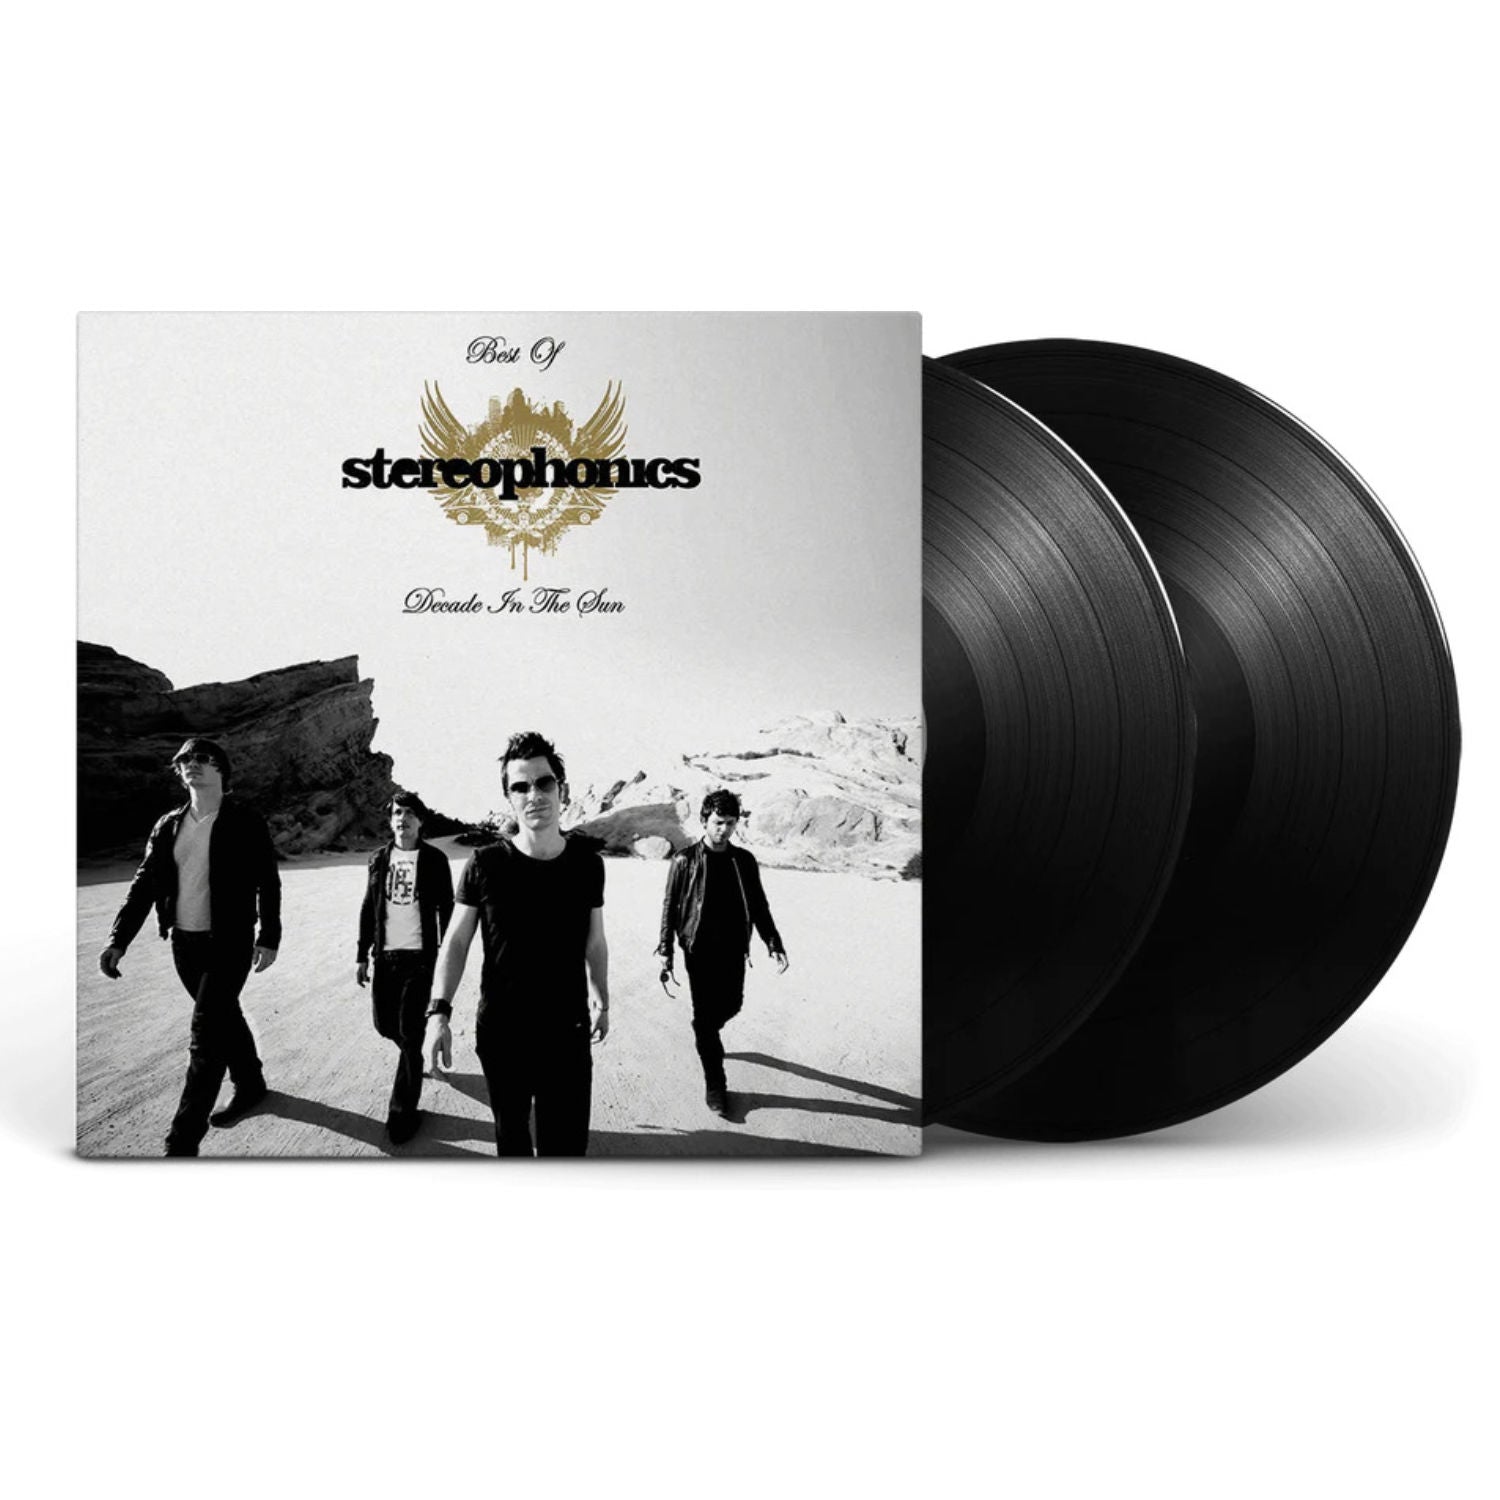 Stereophonics - Decade In The Sun - Best Of Stereophonics: Vinyl 2LP